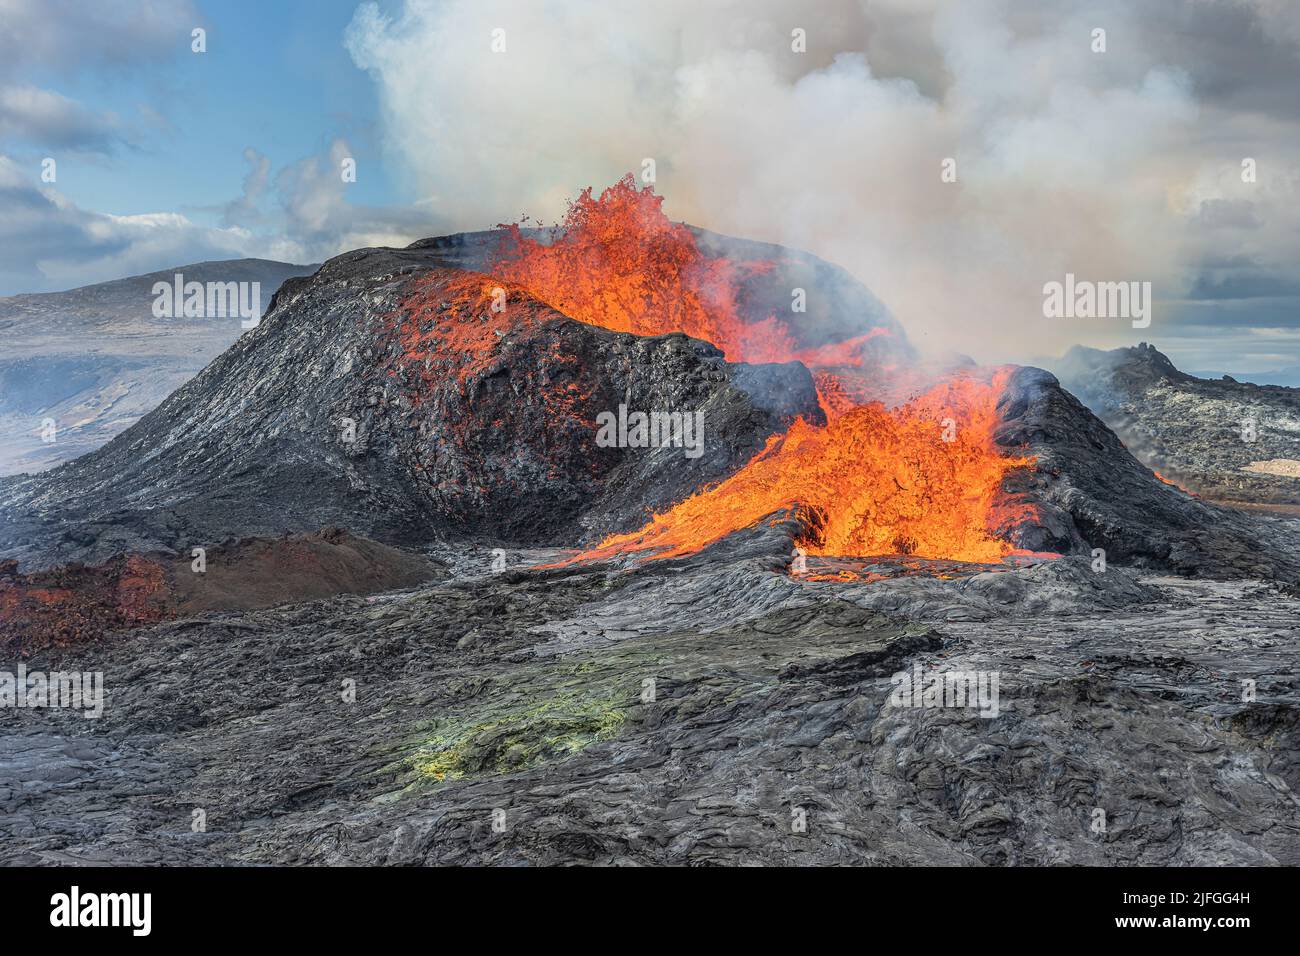 Volcano on Iceland's Reykjanes Peninsula. Lava fountains from the volcanic crater. Landscape in spring with sunshine. Liquid lava flows out of the sid Stock Photo